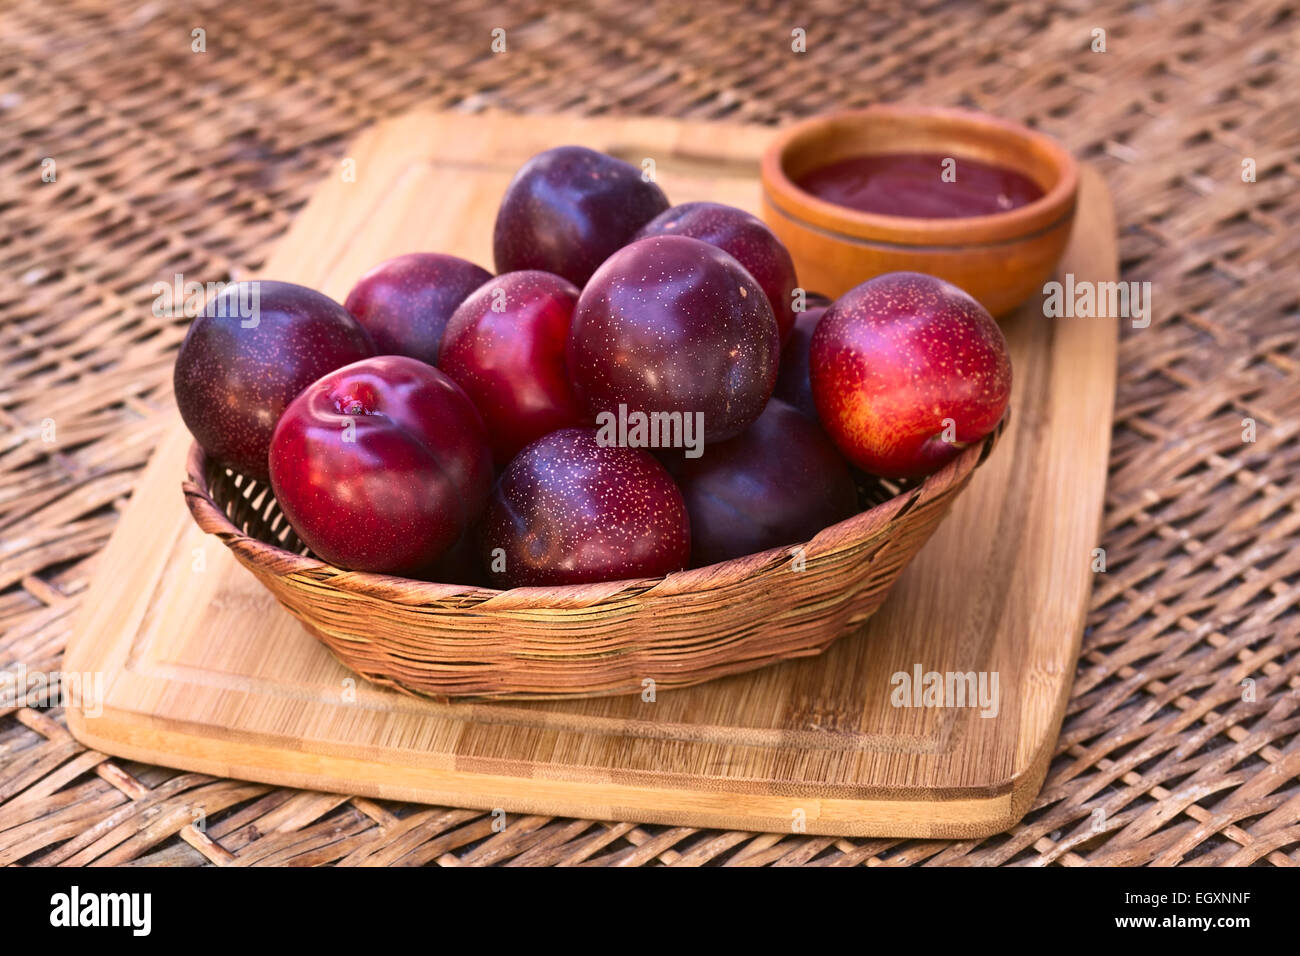 Woven basket filled with satsuma plum with small bowl of plum jam in the back on wooden board photographed with natural light Stock Photo